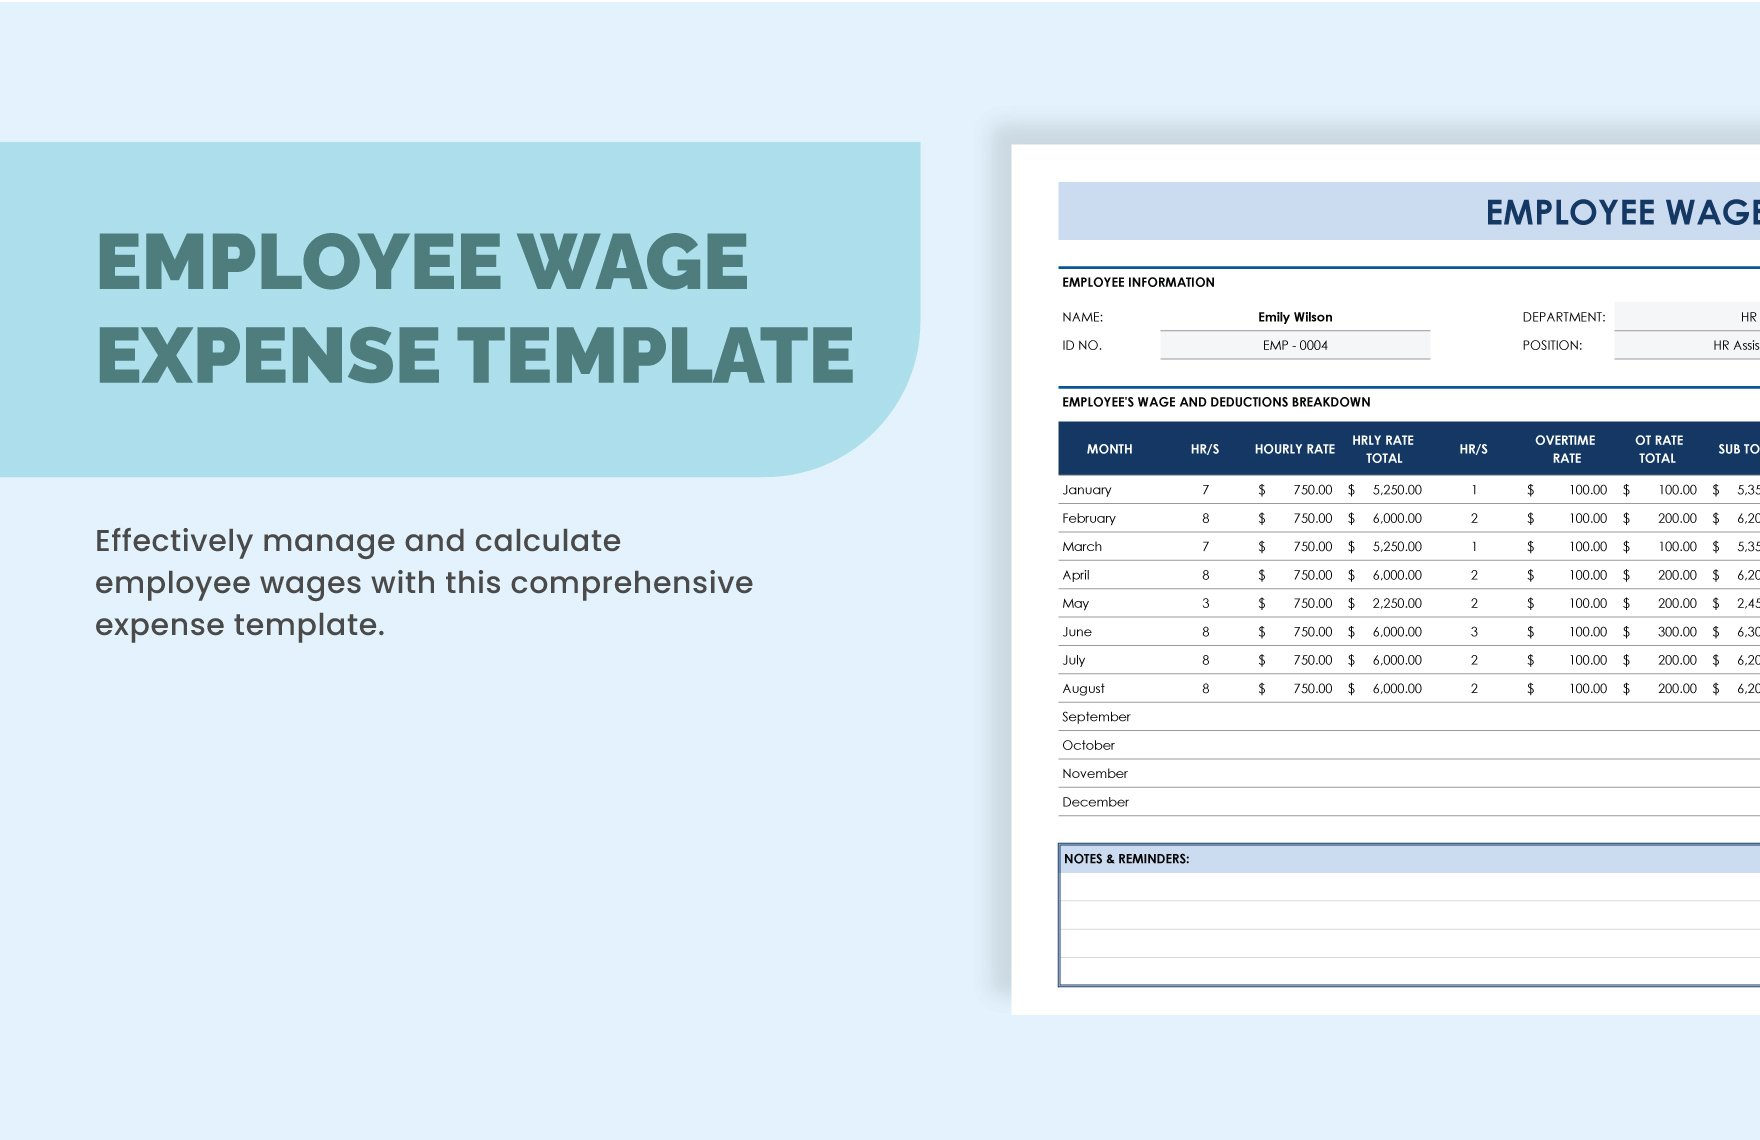 Employee Wage Expense Template